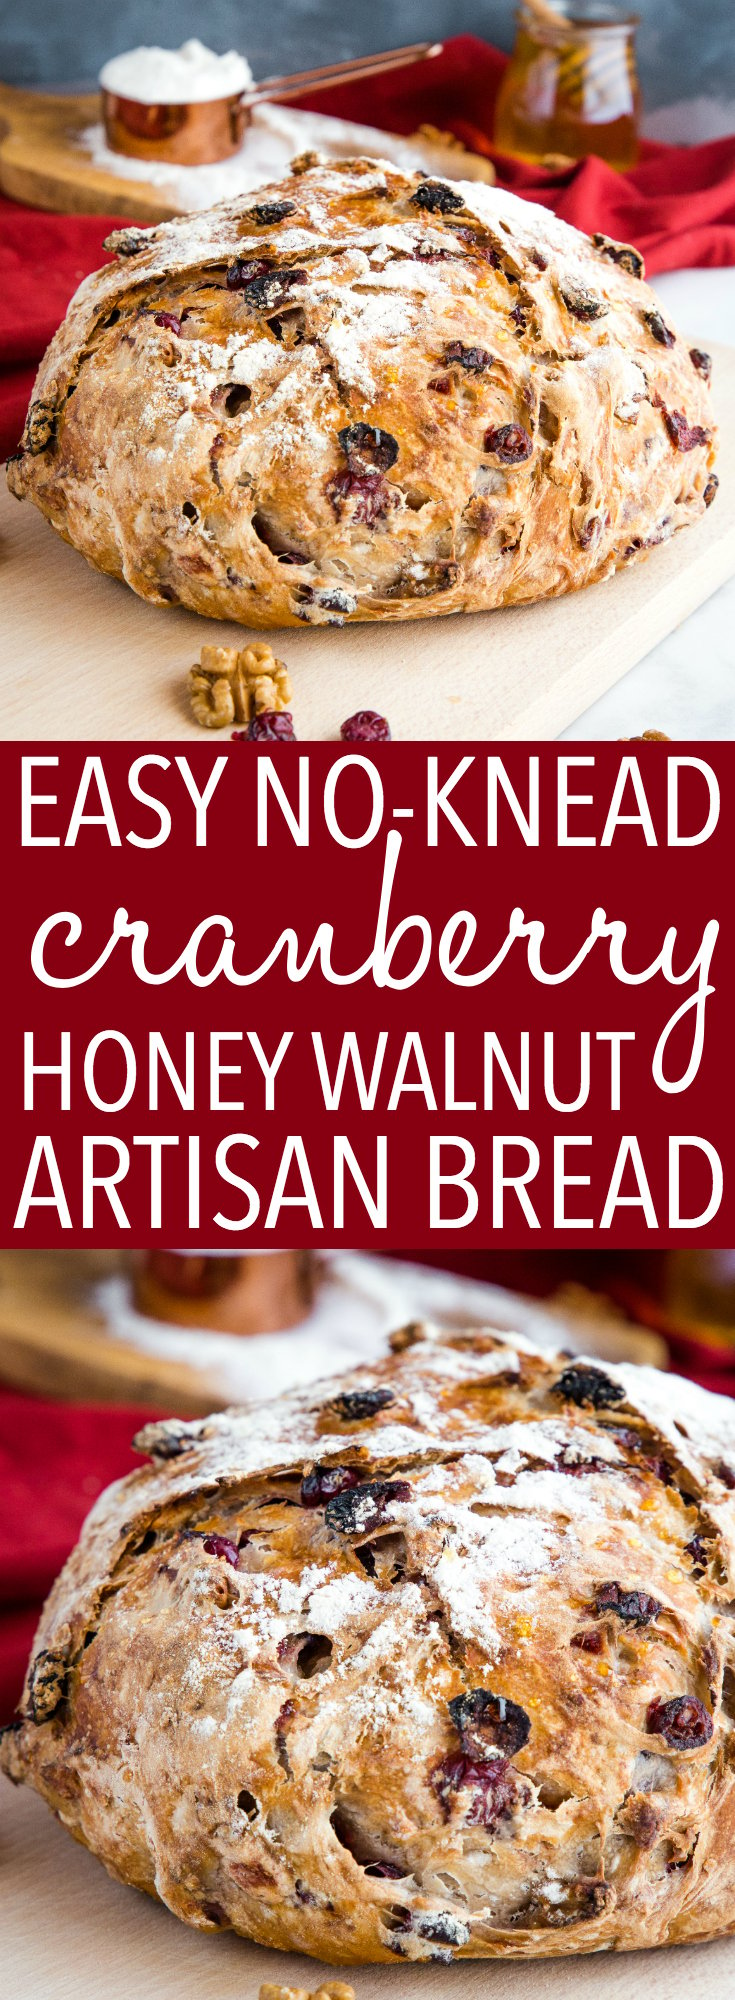 This No-Knead Cranberry Walnut Bread with Honey is a delicious sweet bakery-style bread that's perfect for the holidays! Make it perfect with my easy pro tips for homemade bakery-style bread! Recipe from thebusybaker.ca! #artisanbread #cramberry #honey #walnut #holiday #holidays #bread #easy #recipe #comfortfood #bakerstyle #homemade via @busybakerblog